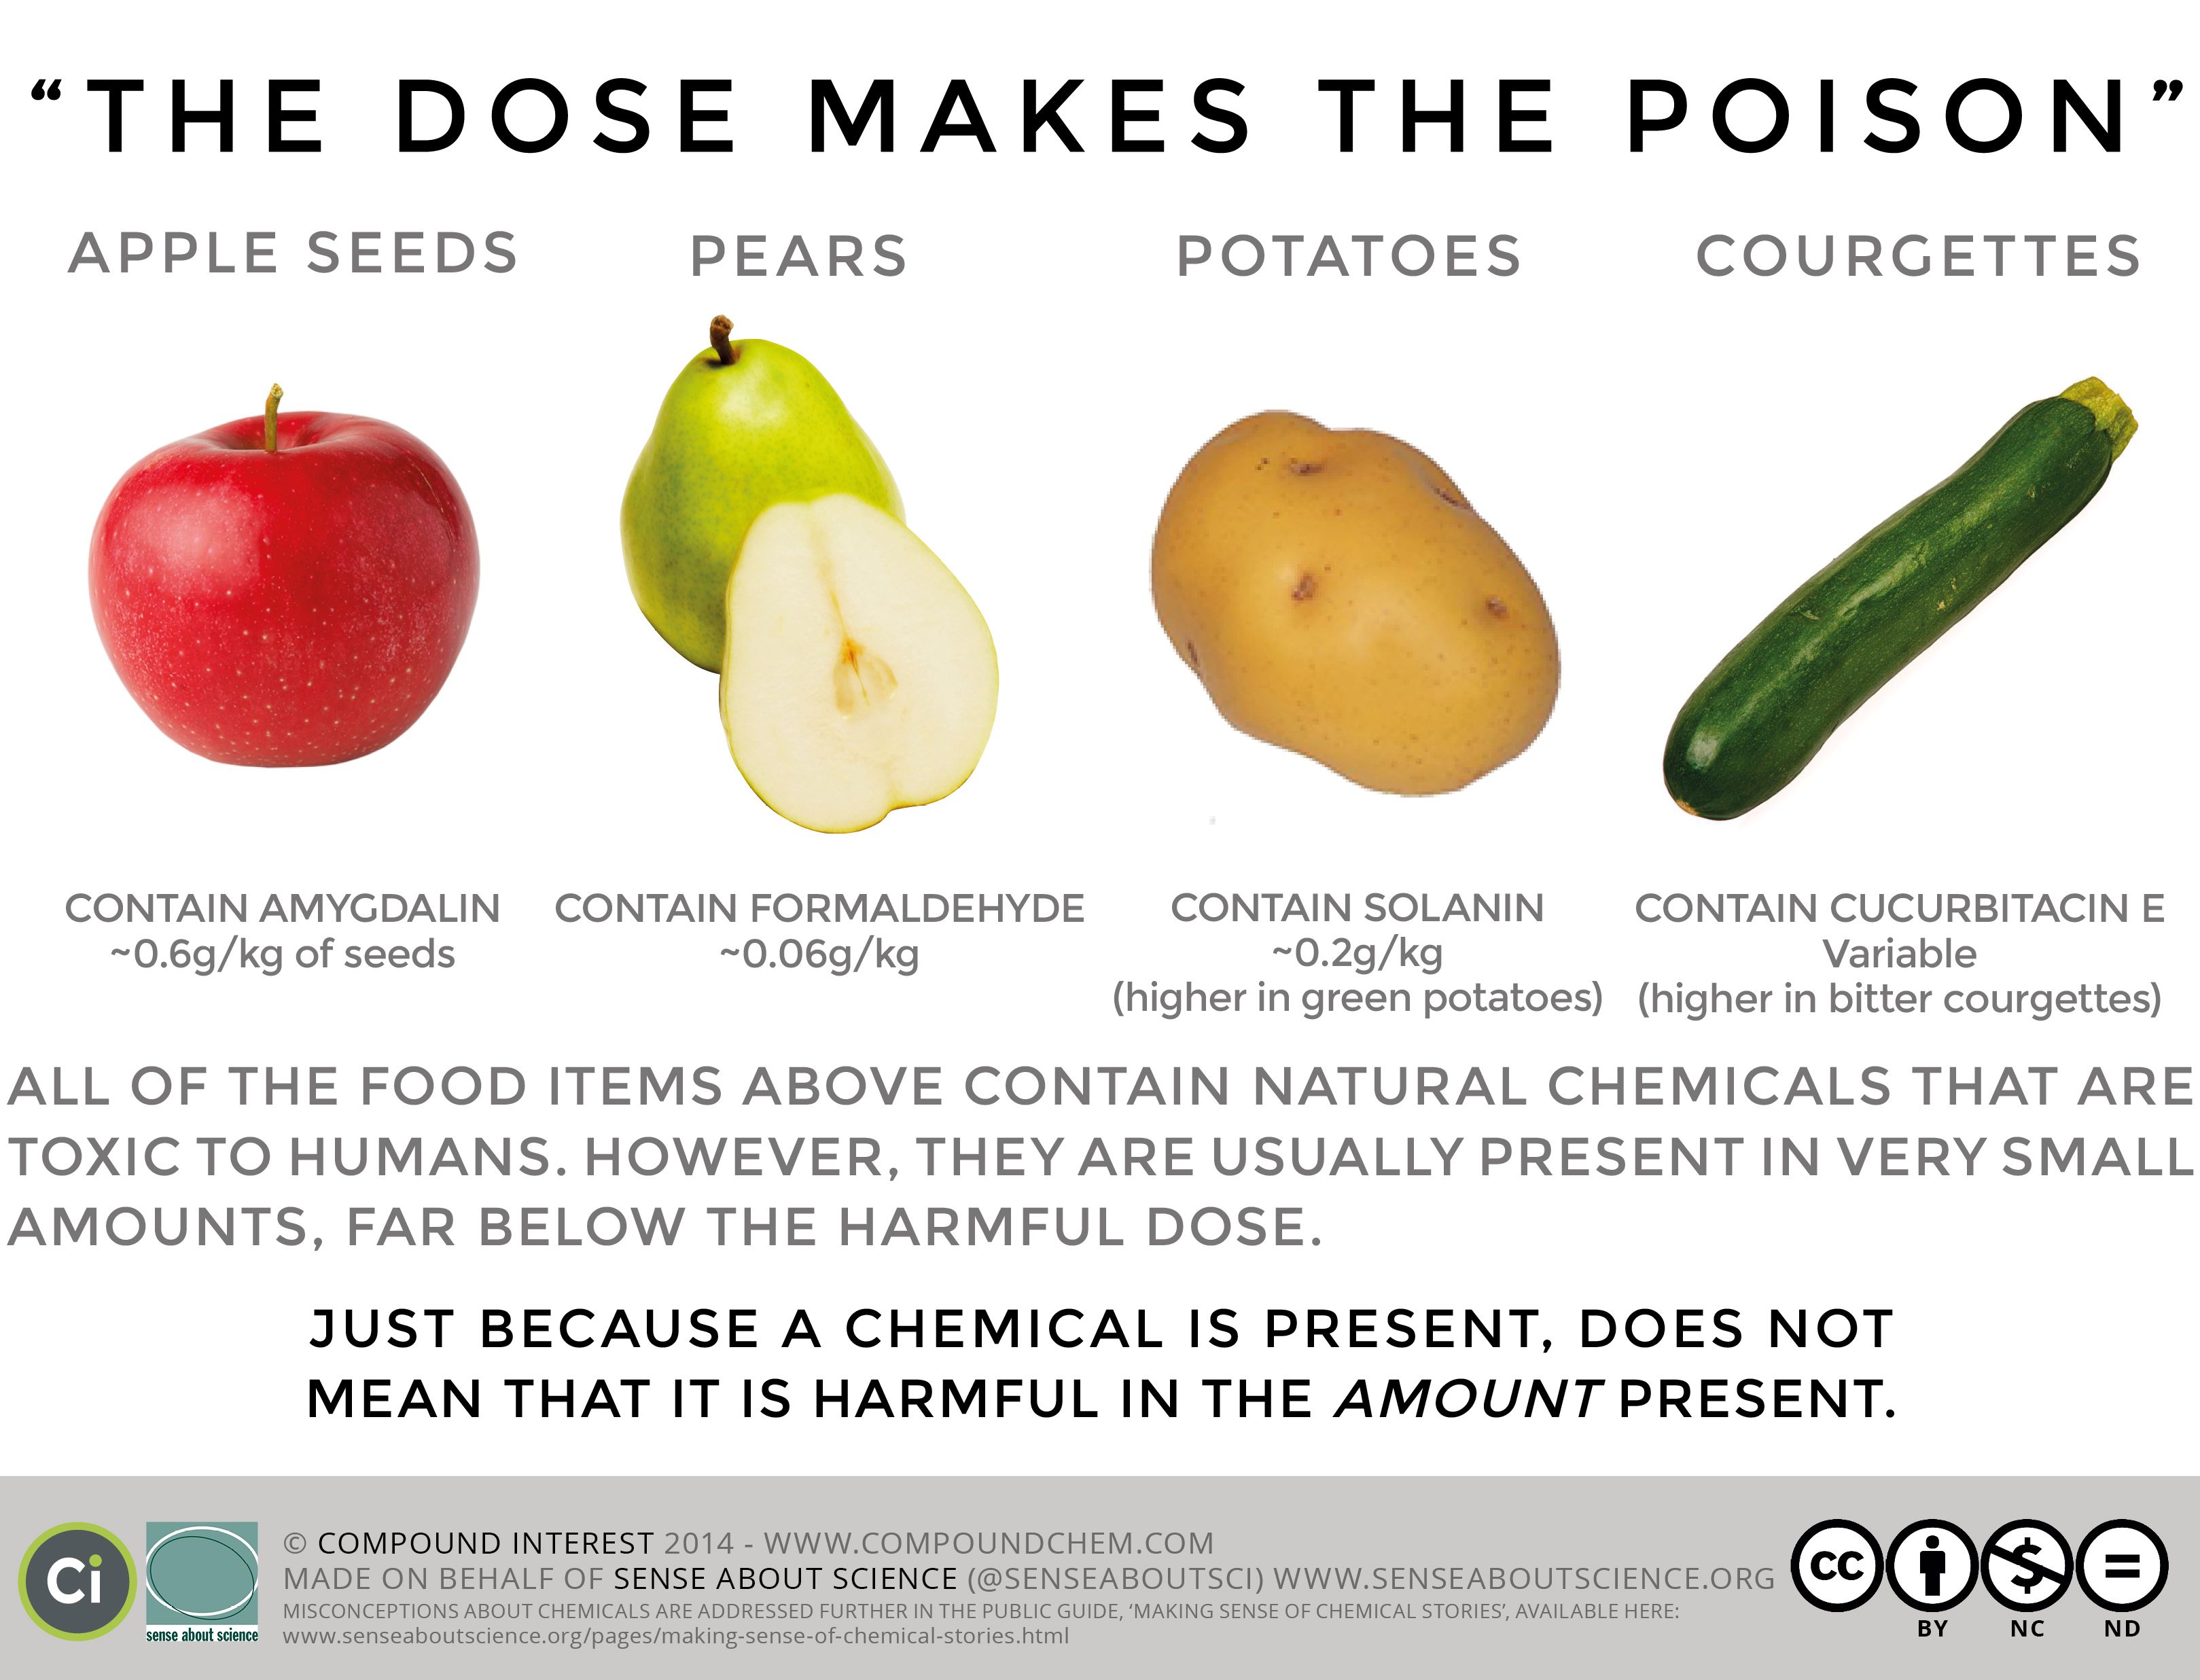 Lethal Doses of Common Chemicals. | Food Science | Pinterest | Food ...